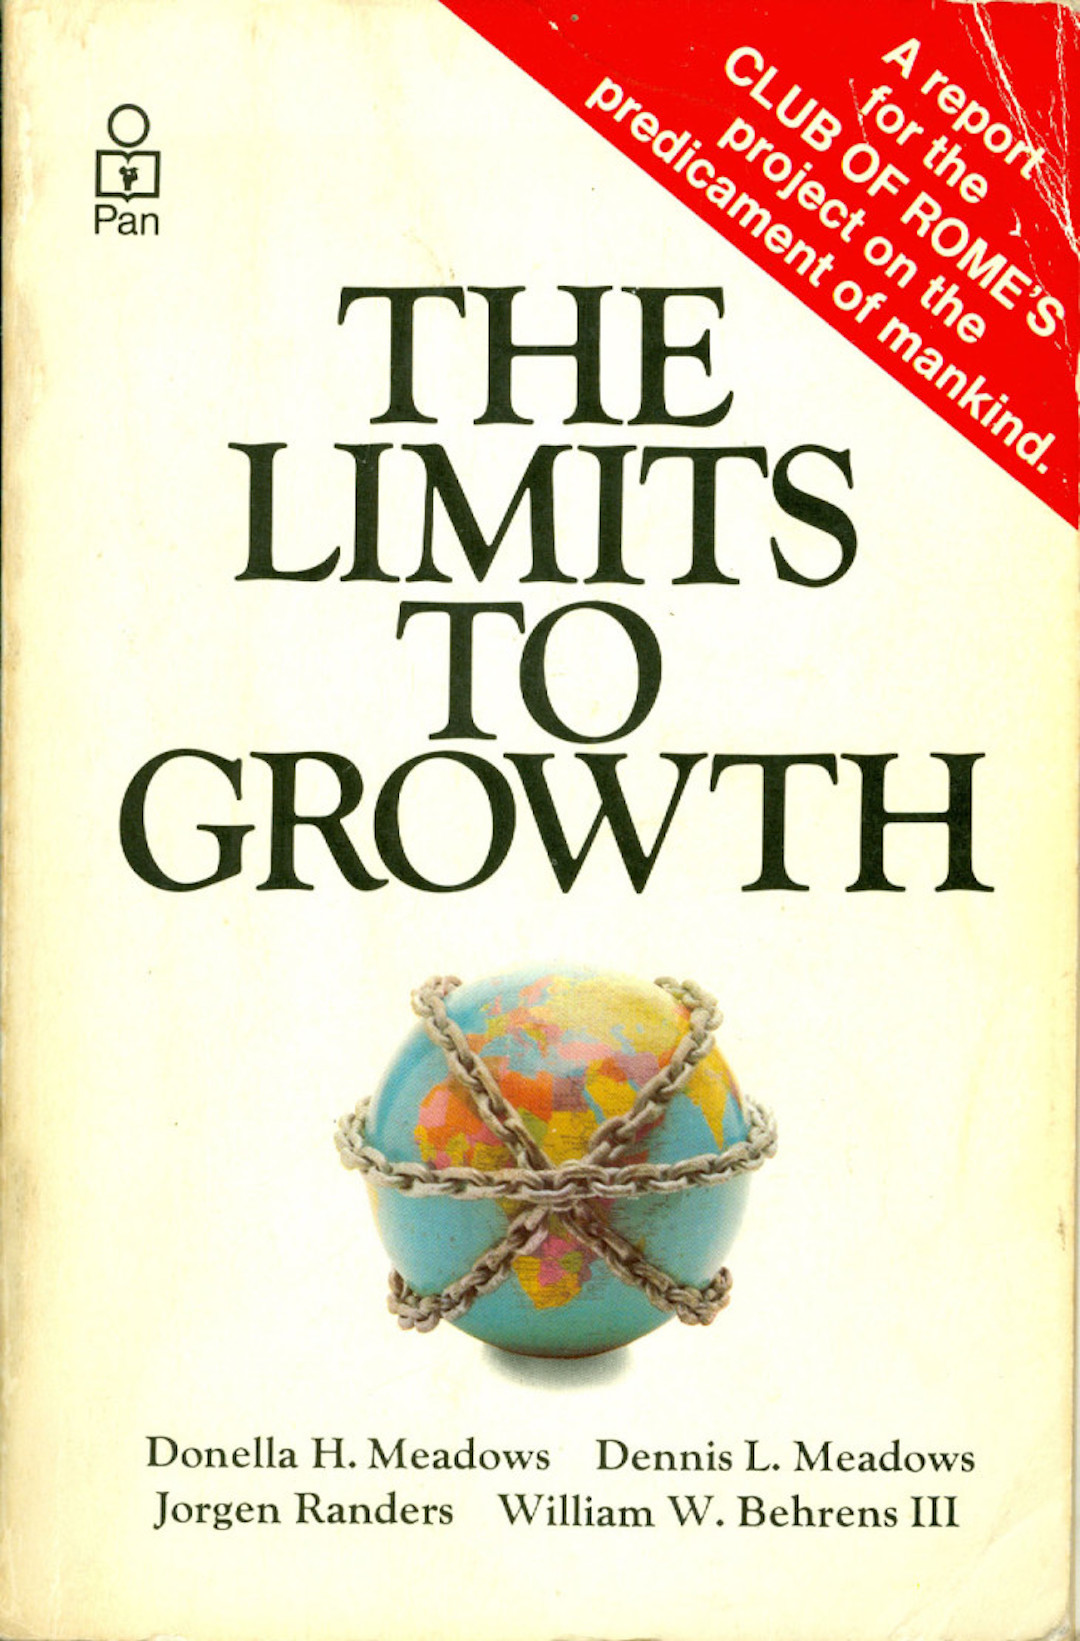 Limits to Growth - report to the Club of Rome [book cover] 1972 (2)